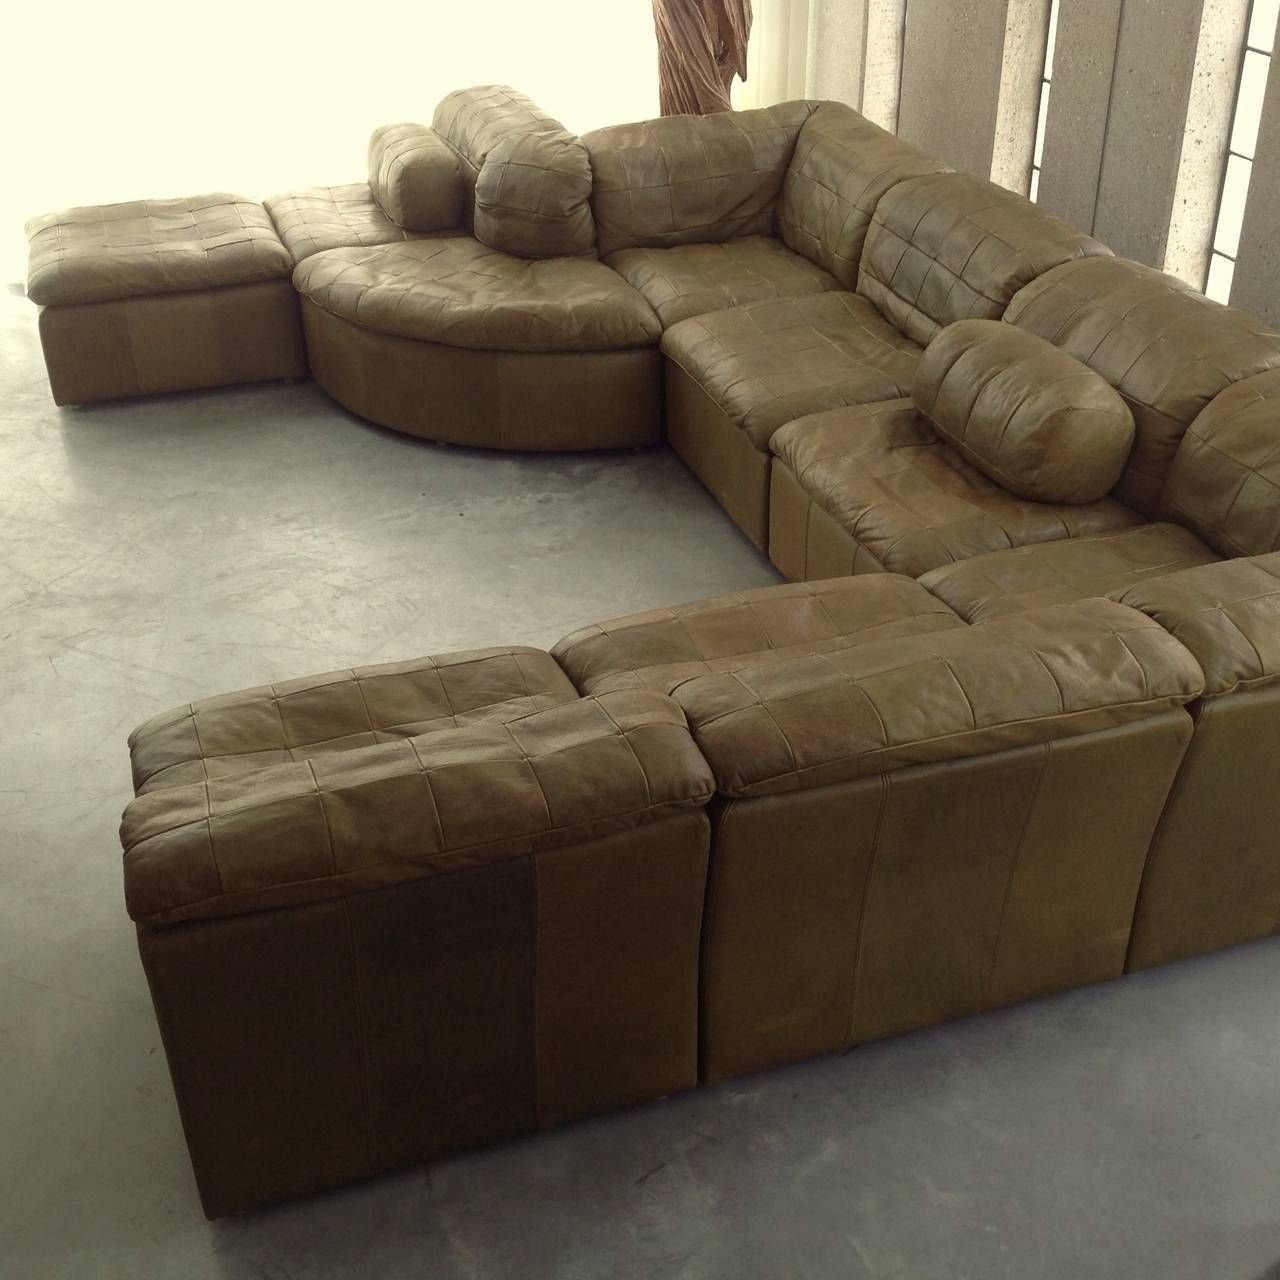 Green Leather Sectional Sofa With Design Image 29131 | Kengire With Green Sectional Sofa (View 8 of 30)